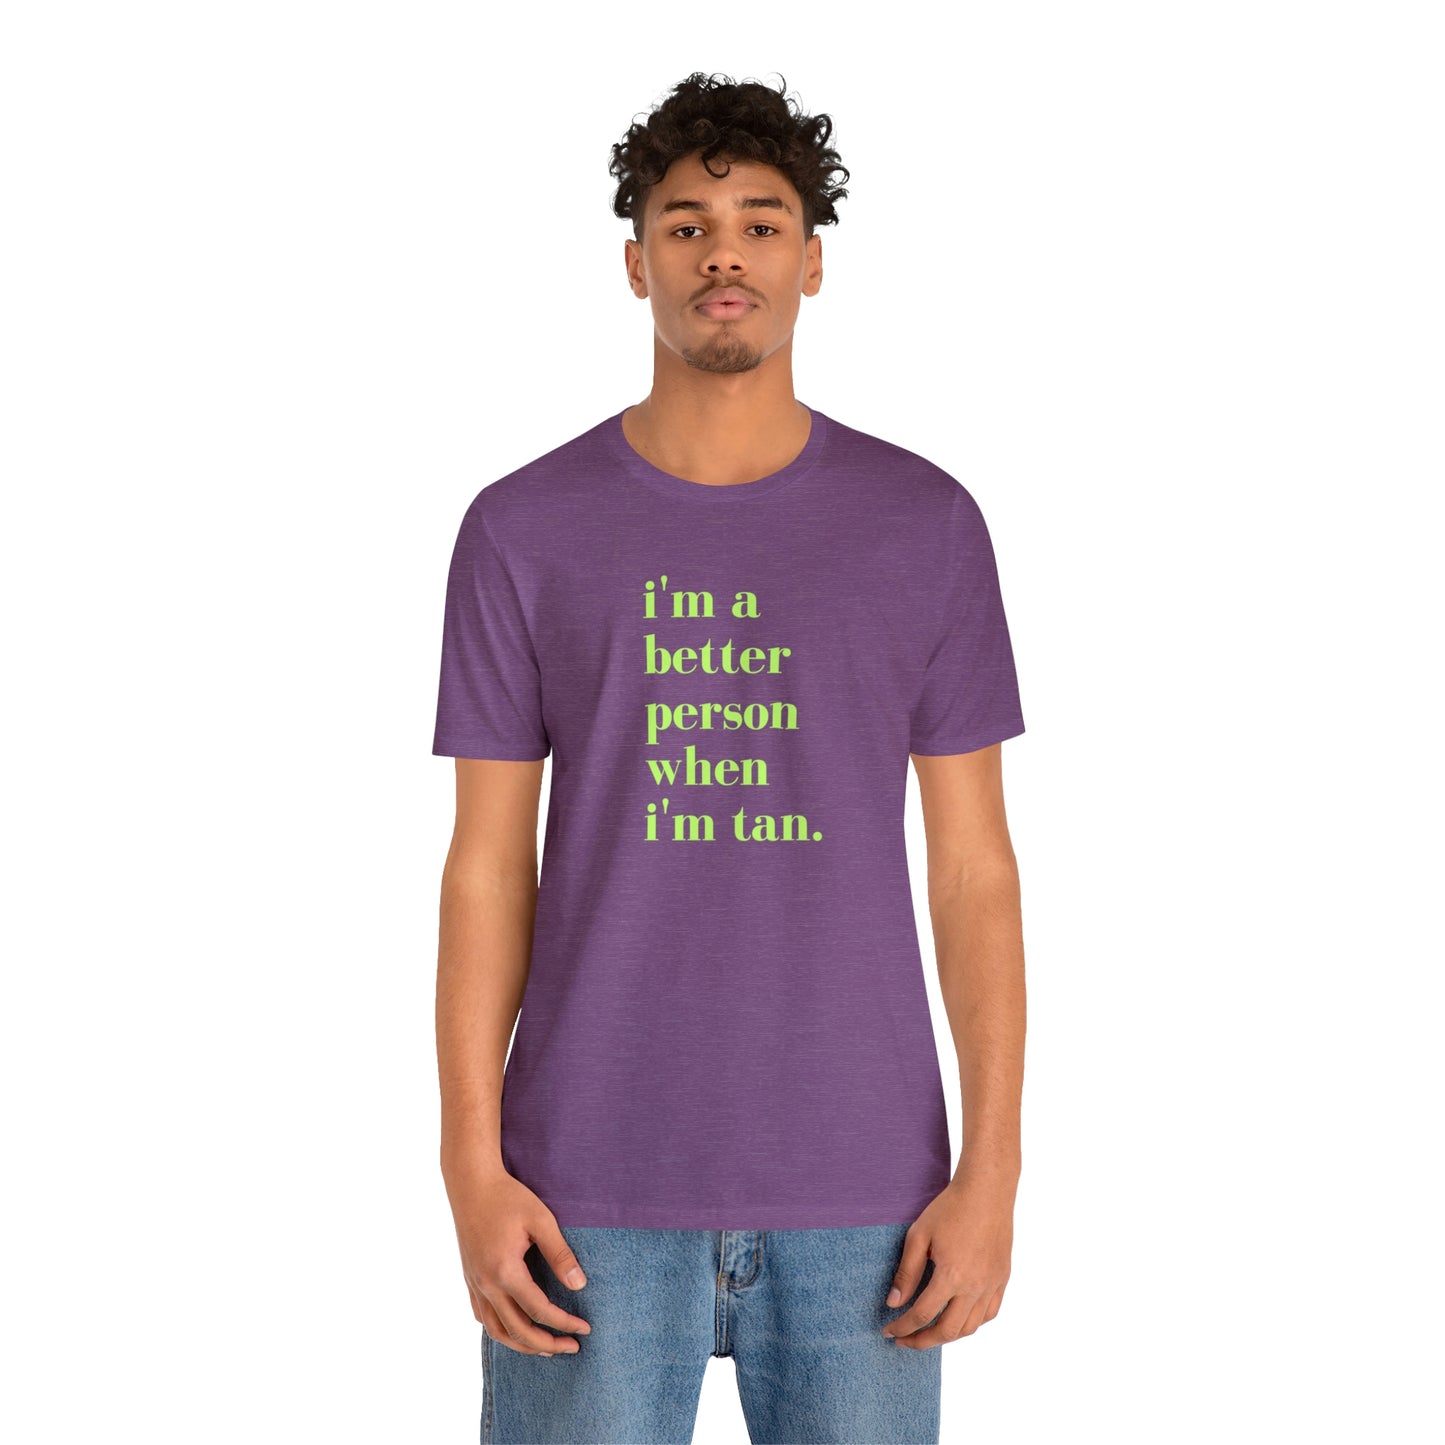 i'm a better person when i'm tan- Unisex Jersey Short Sleeve Tee